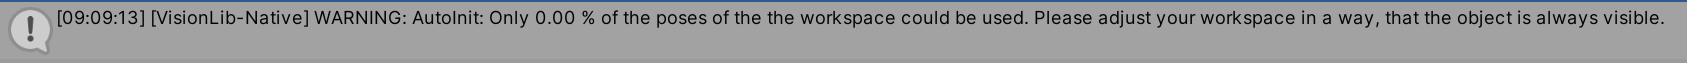 AutoInit_WorkSpace_Warning.png